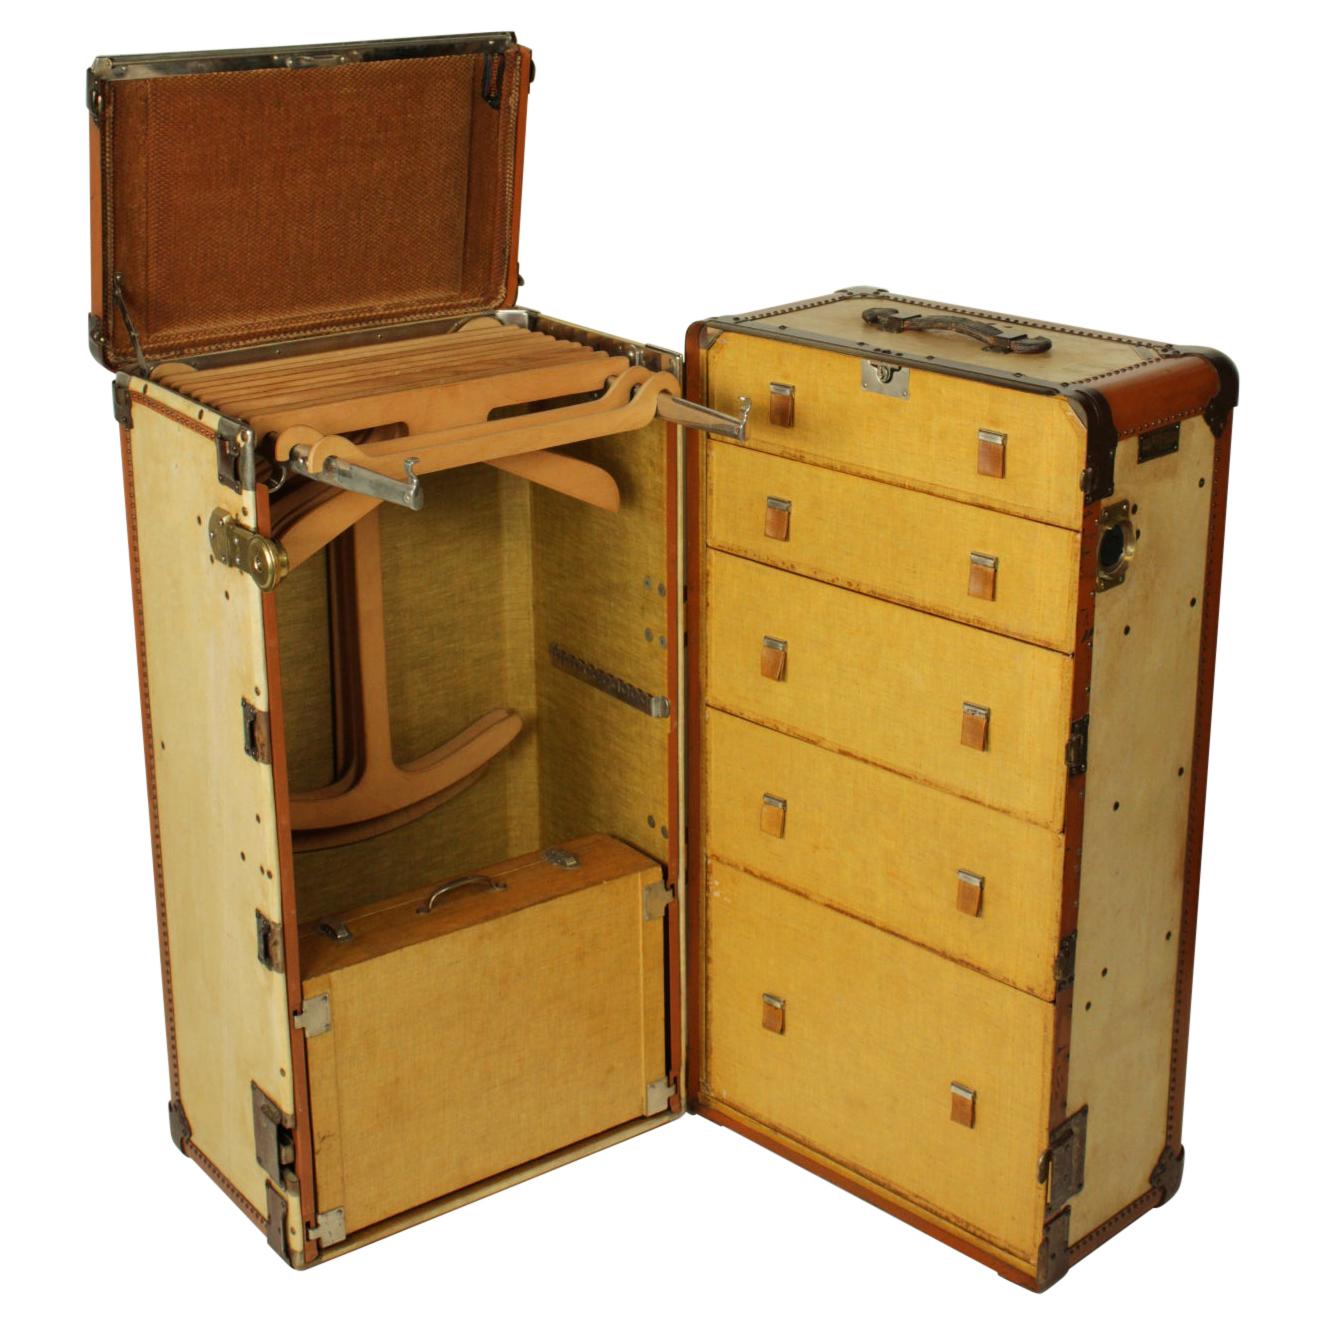 Large Leather and Metal Full Closet Steamer Trunk, circa 1930s